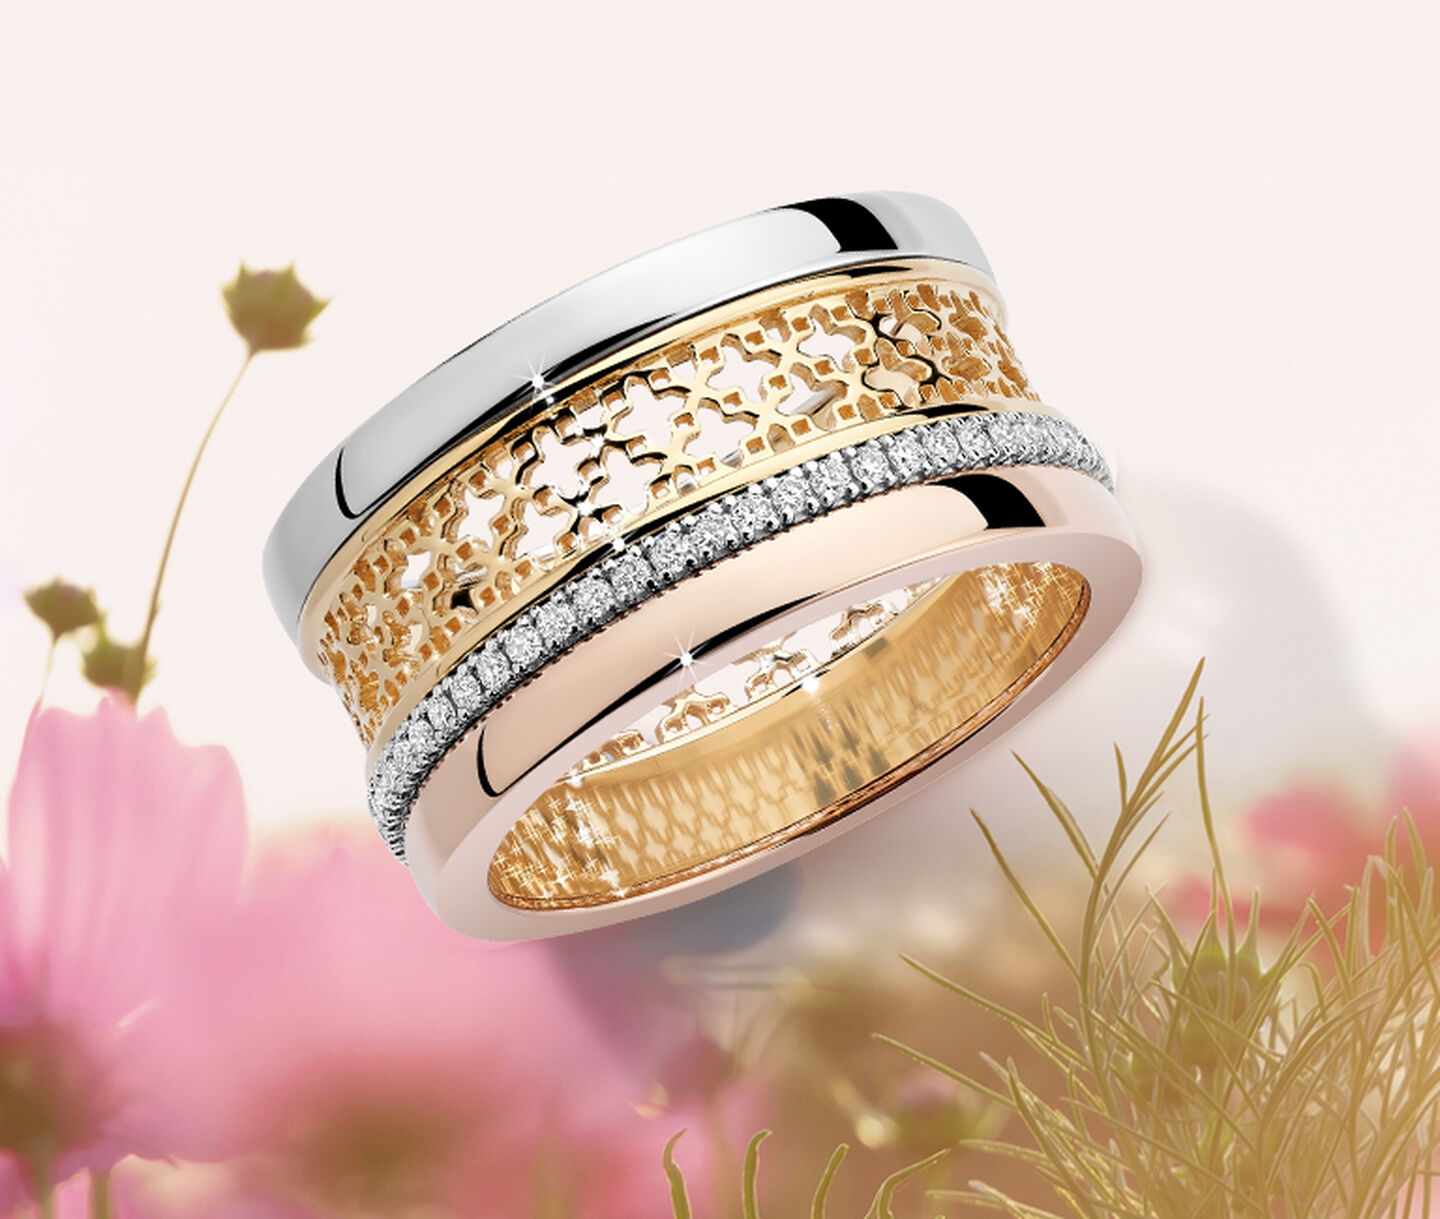 A Birks Dare to Dream tri-gold ring on a floral background.